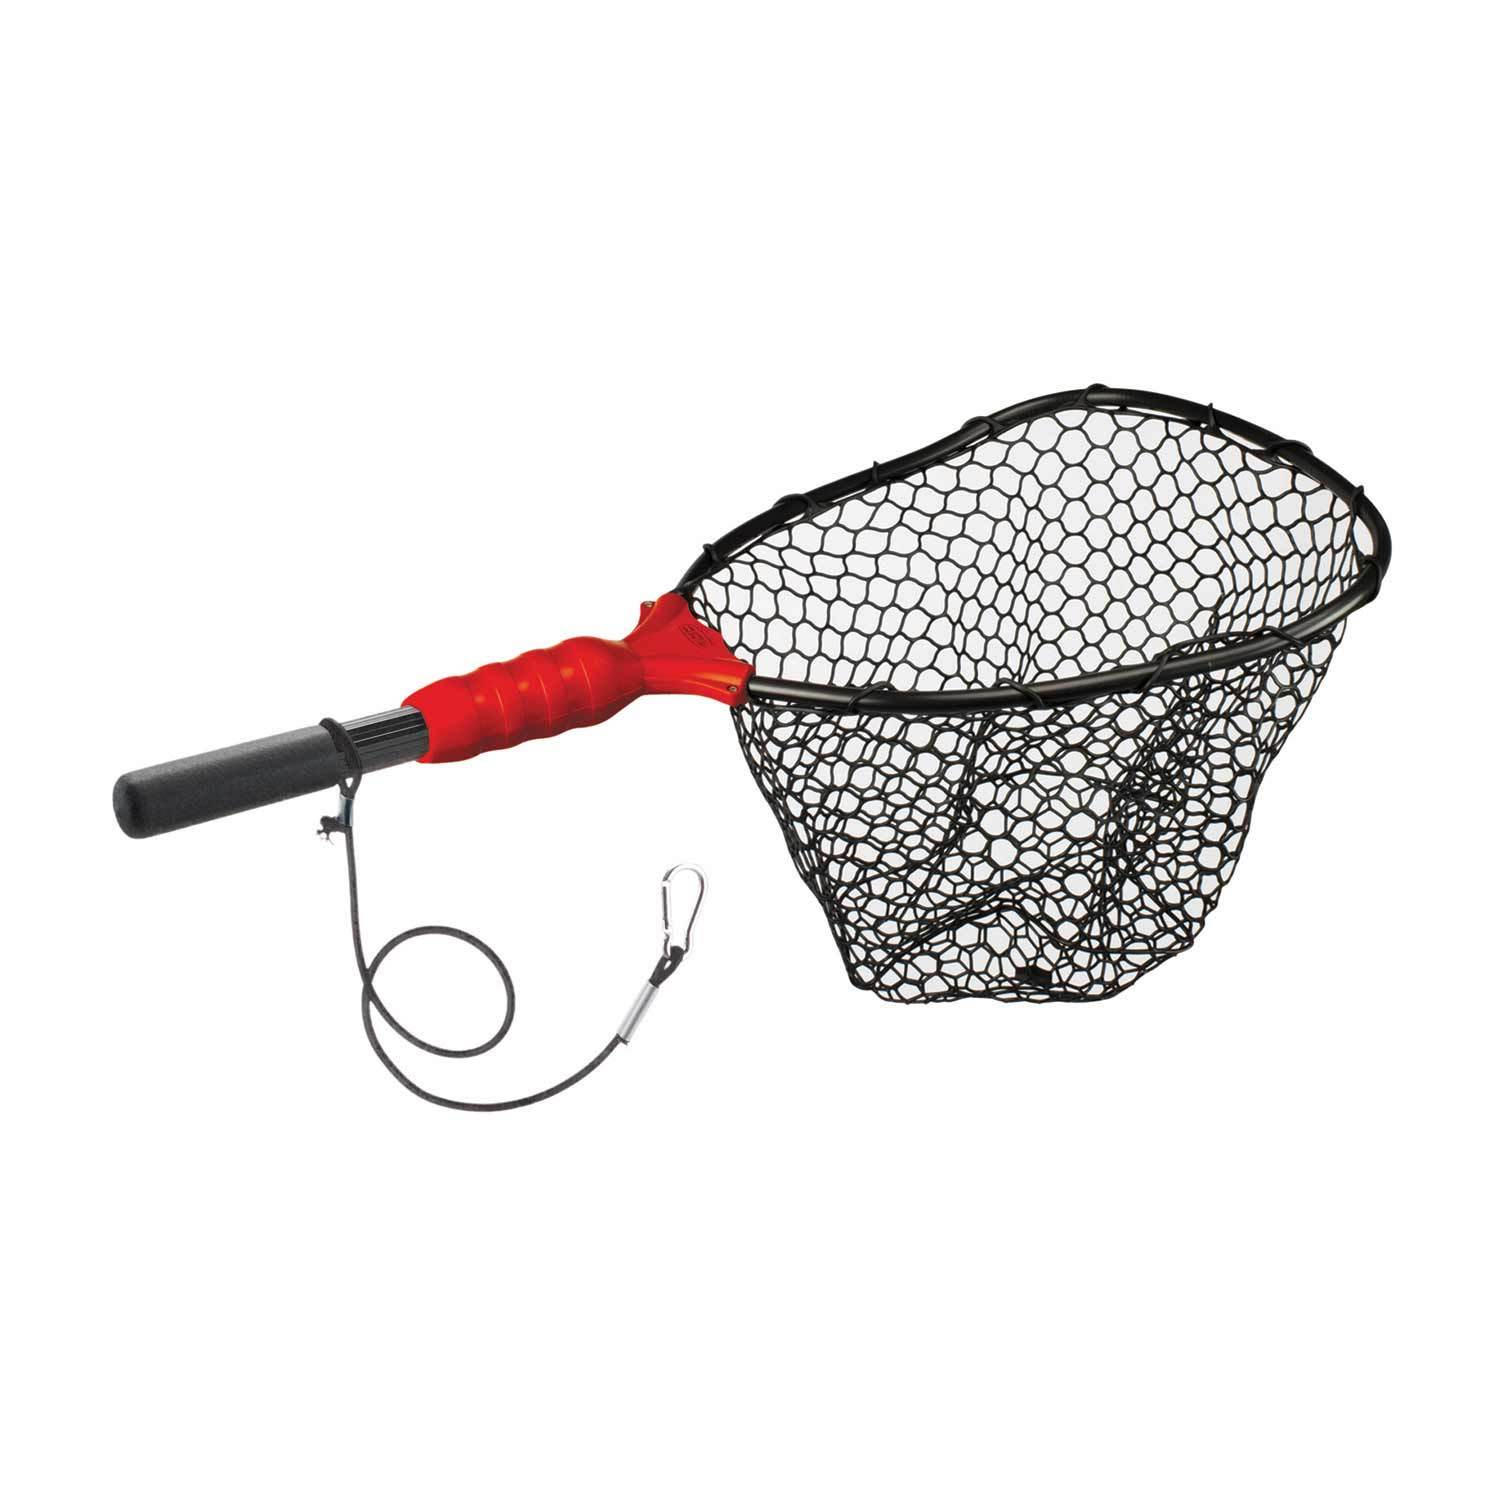 EGO Small Wading Rubber Landing Net